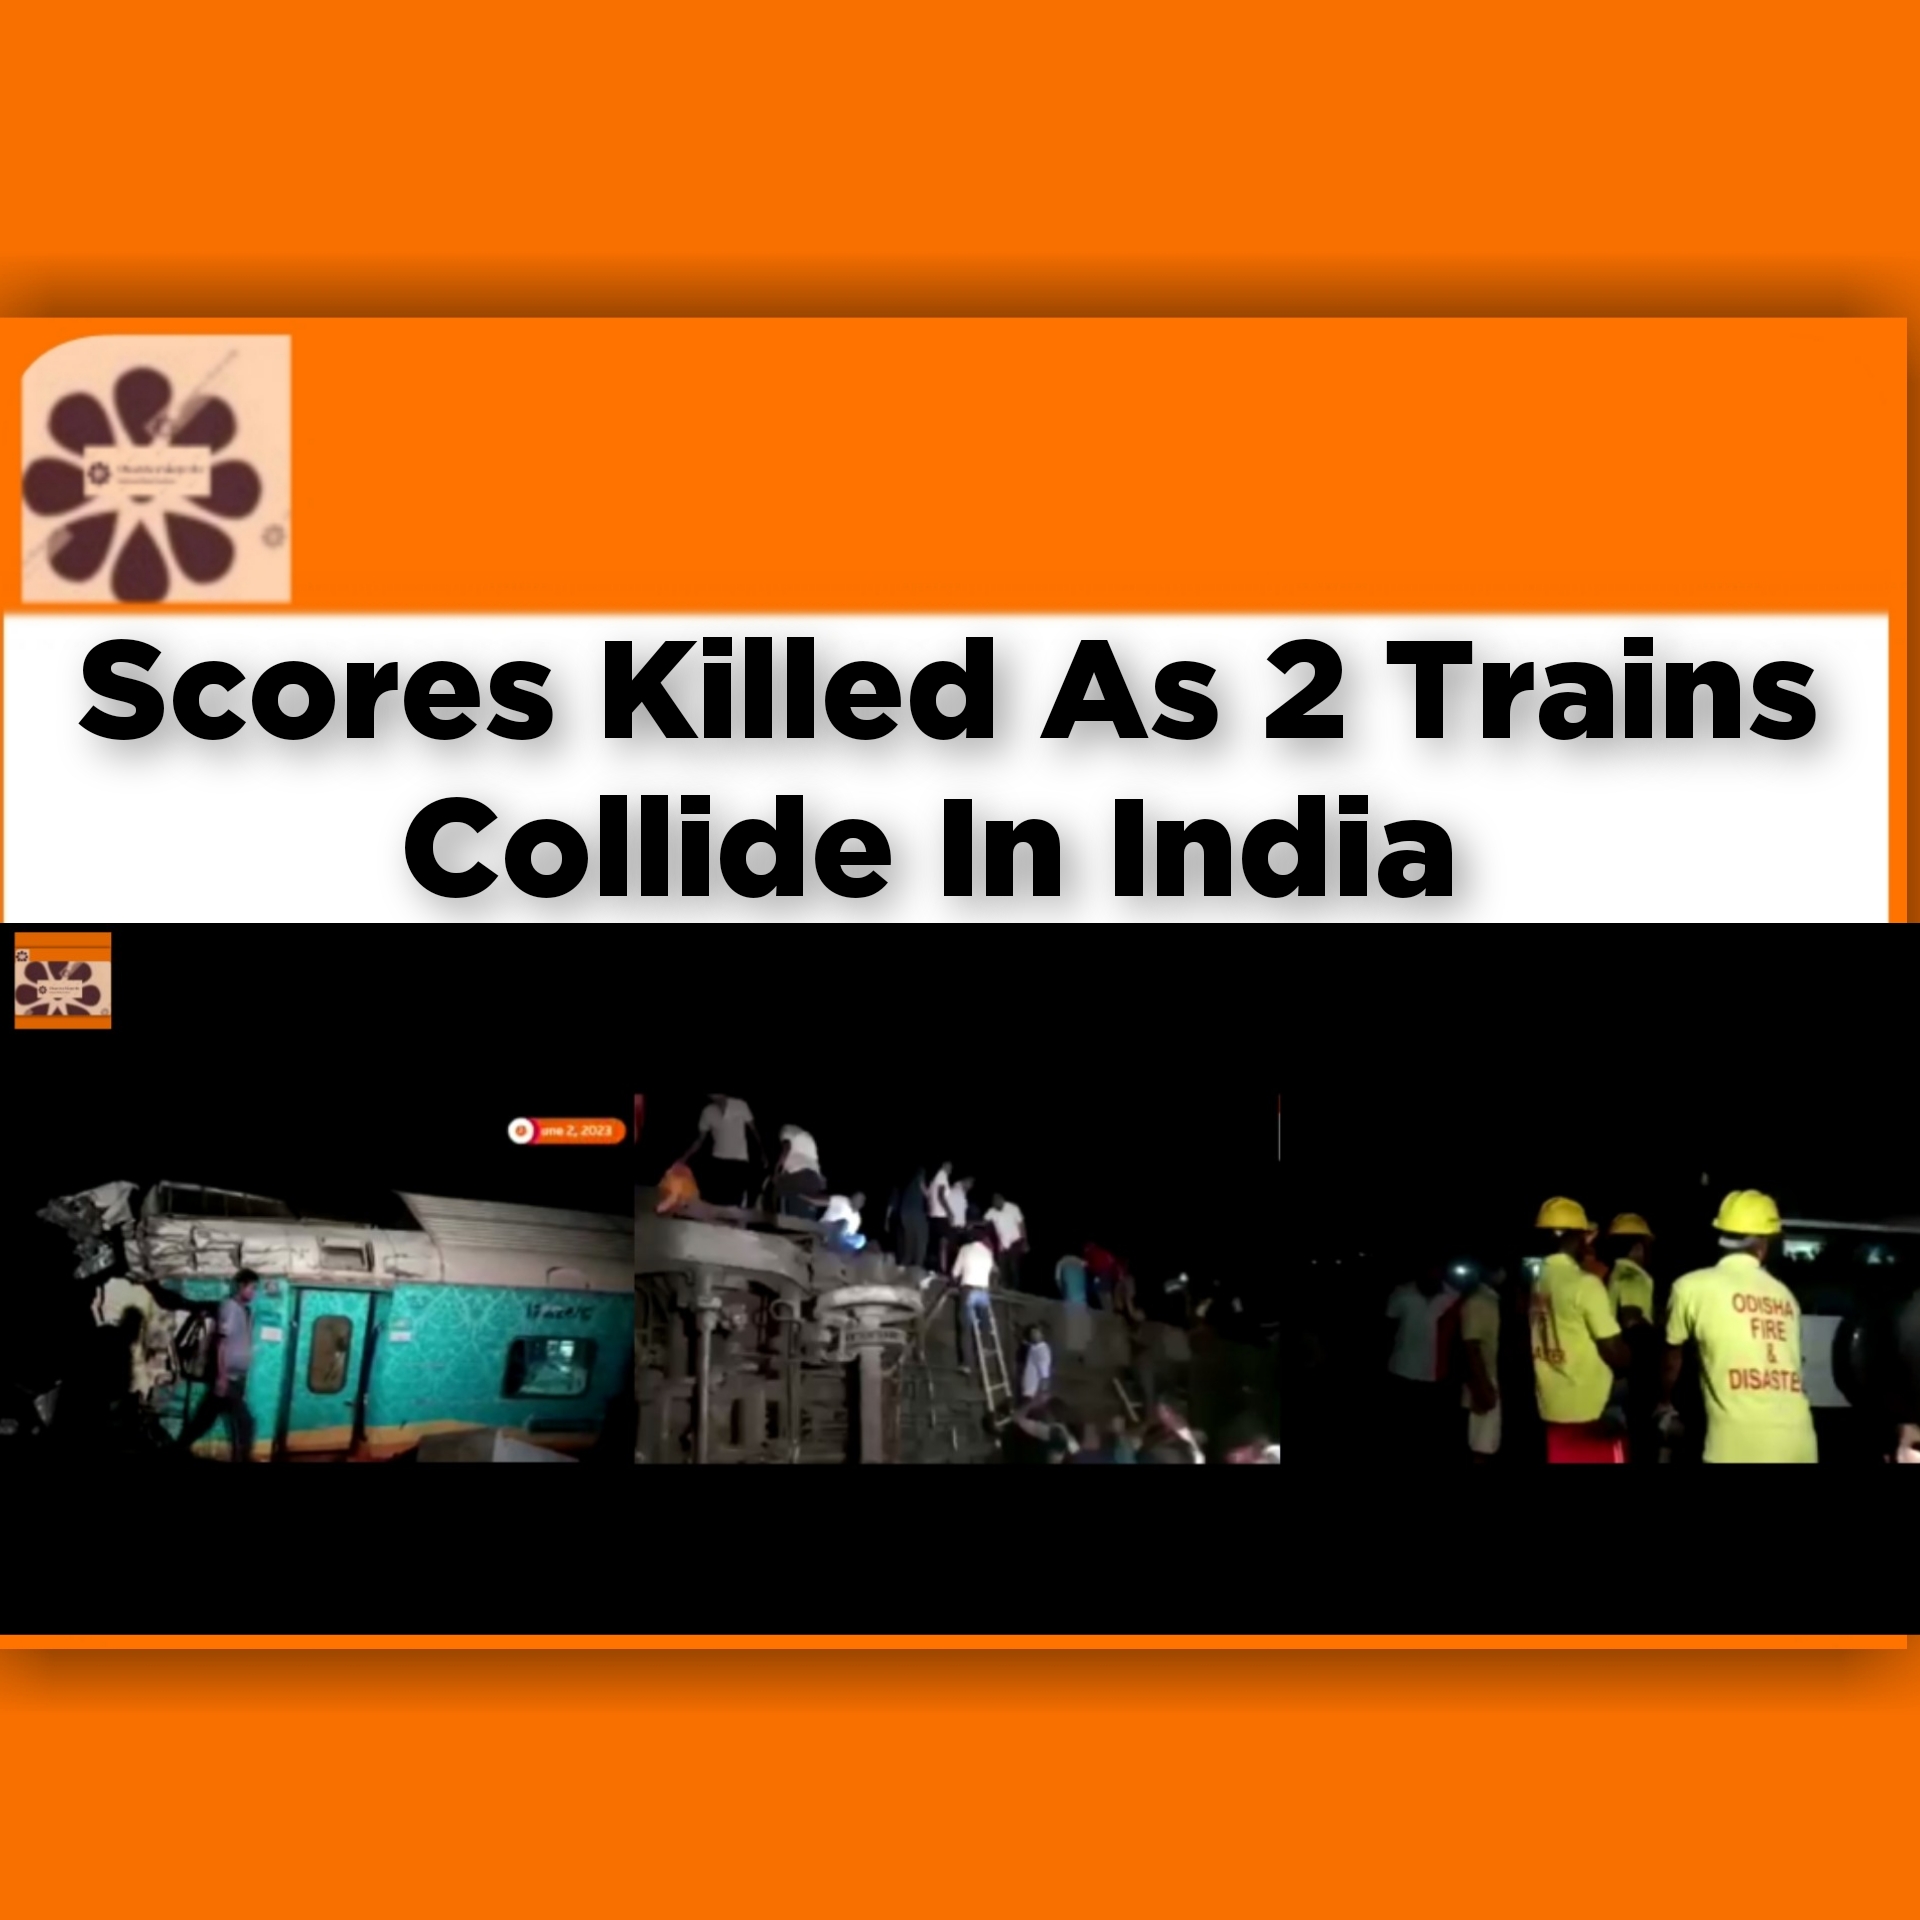 Scores Killed As 2 Trains Collide In India ~ OsazuwaAkonedo #elections